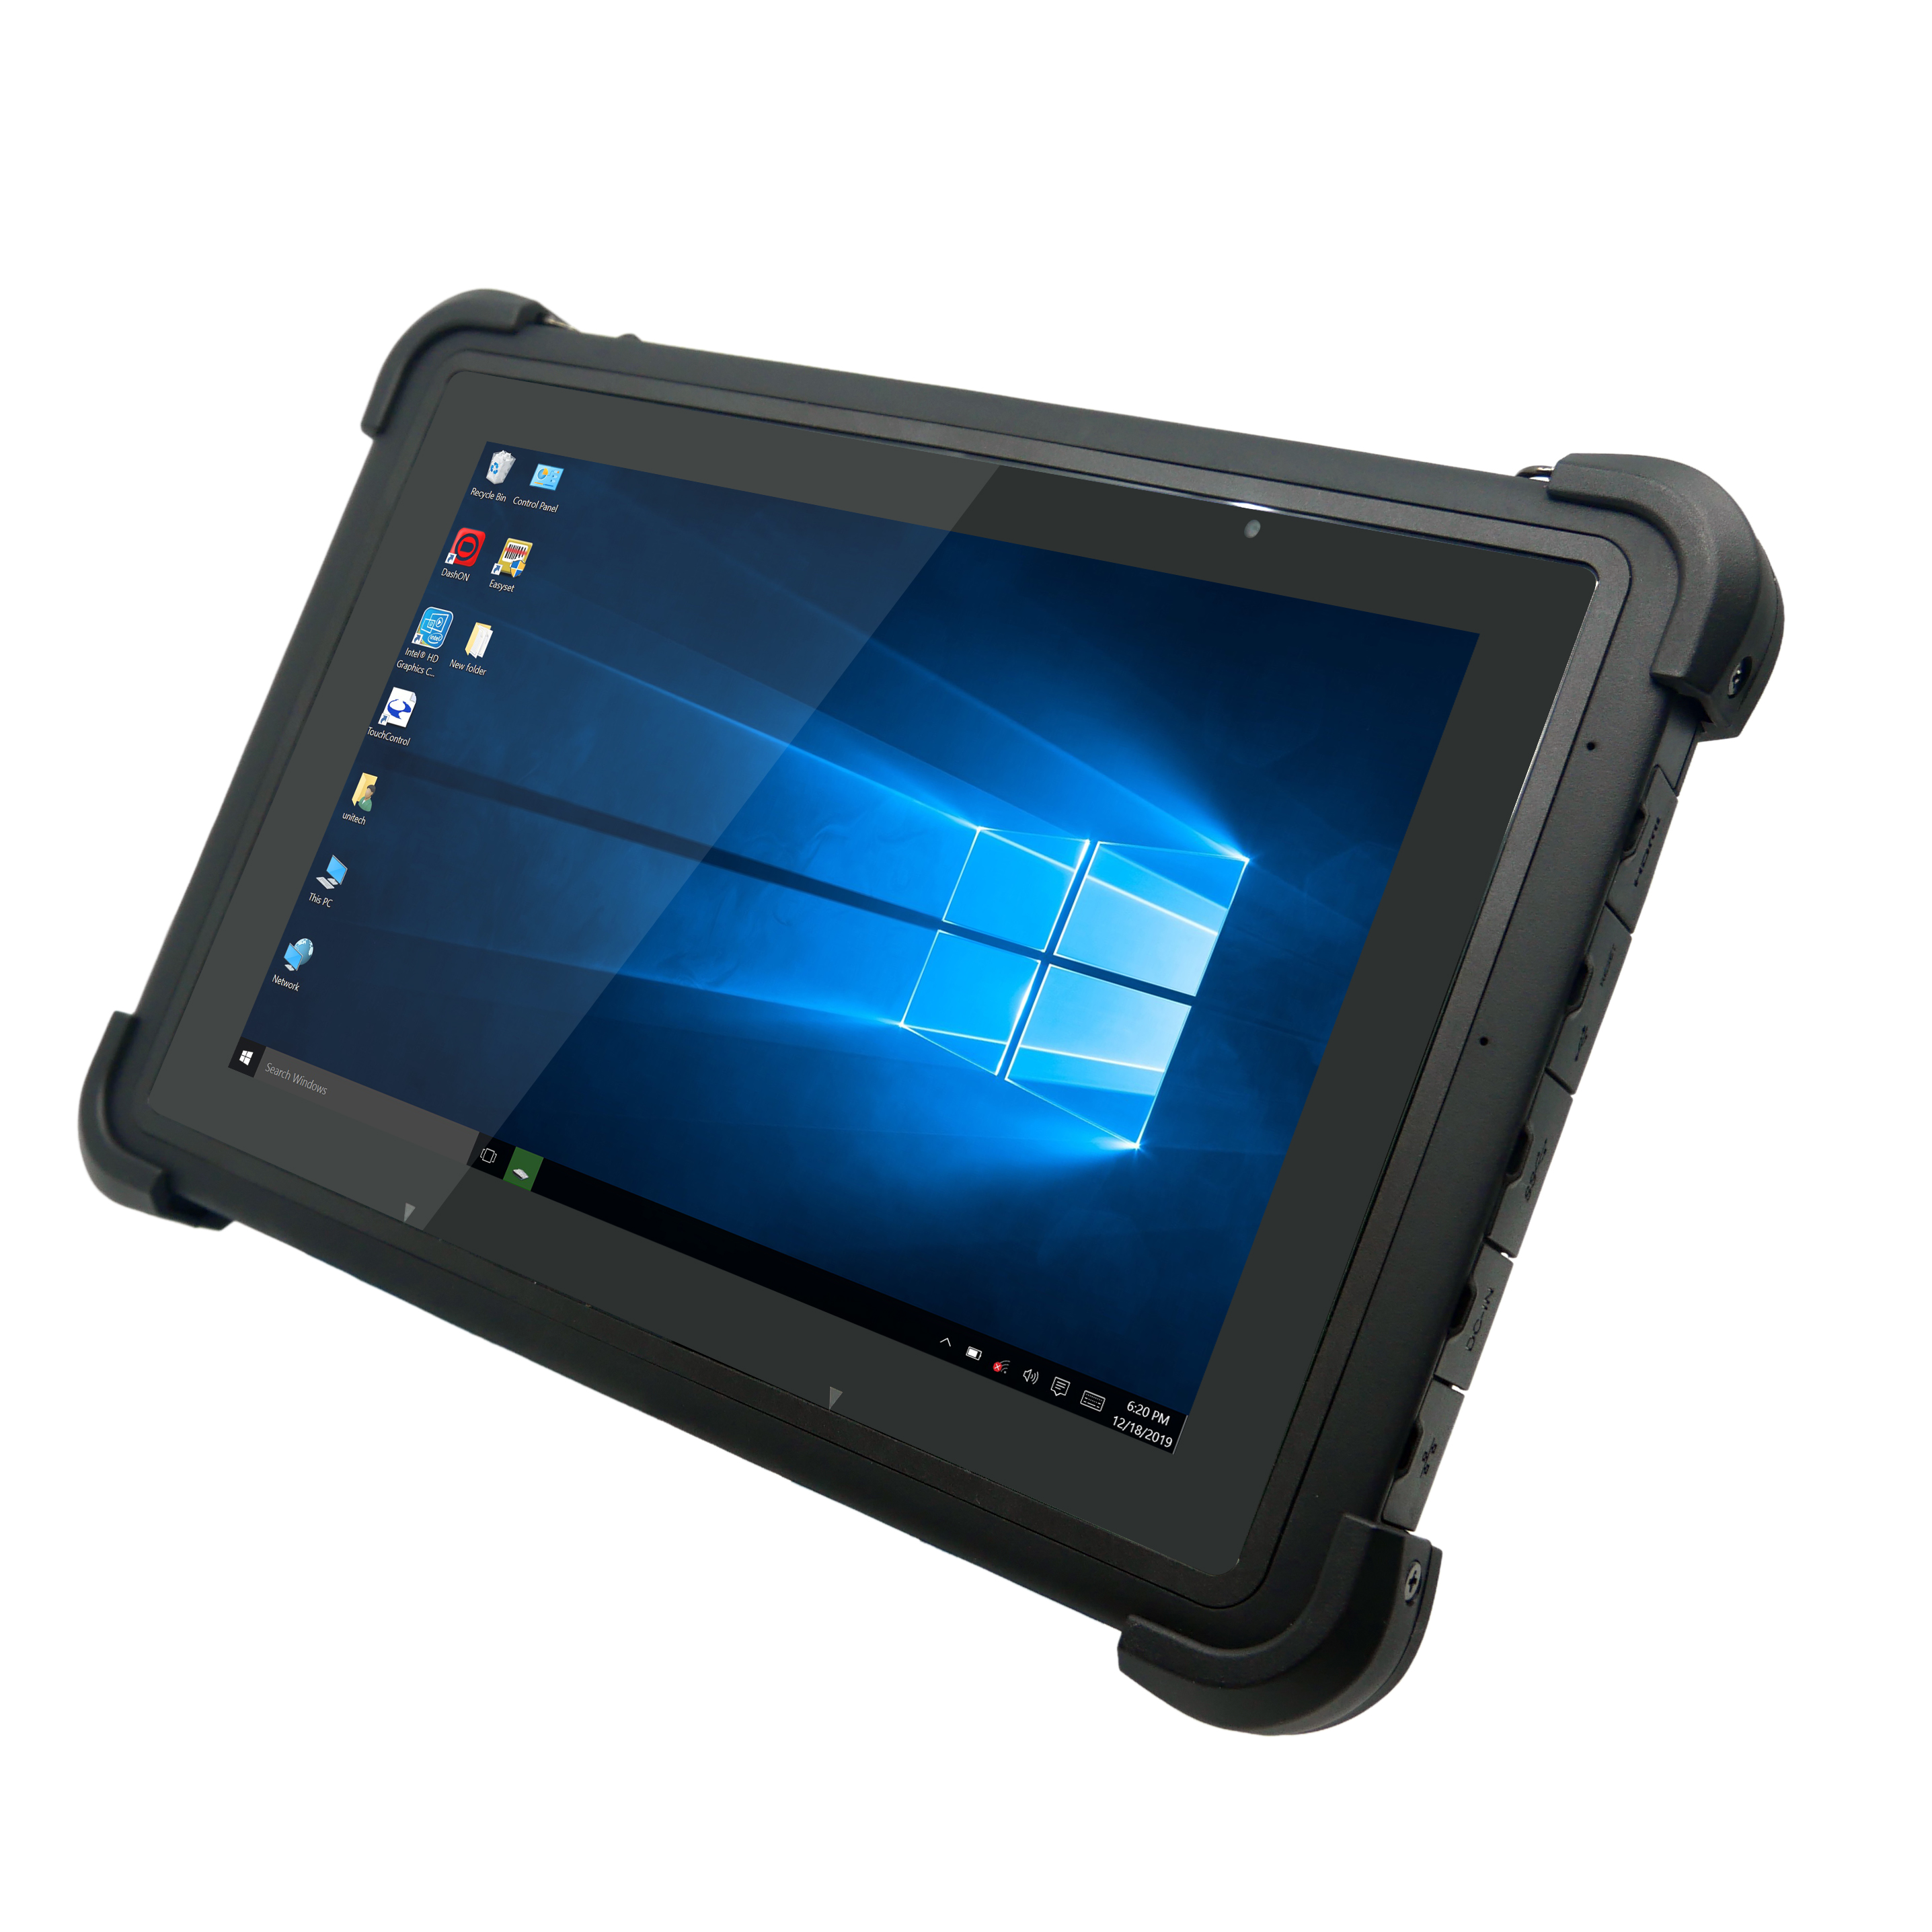 Unitech TB162 Tablet [10.1", No Scanner with Windows 10] TB162-0T62UMNG